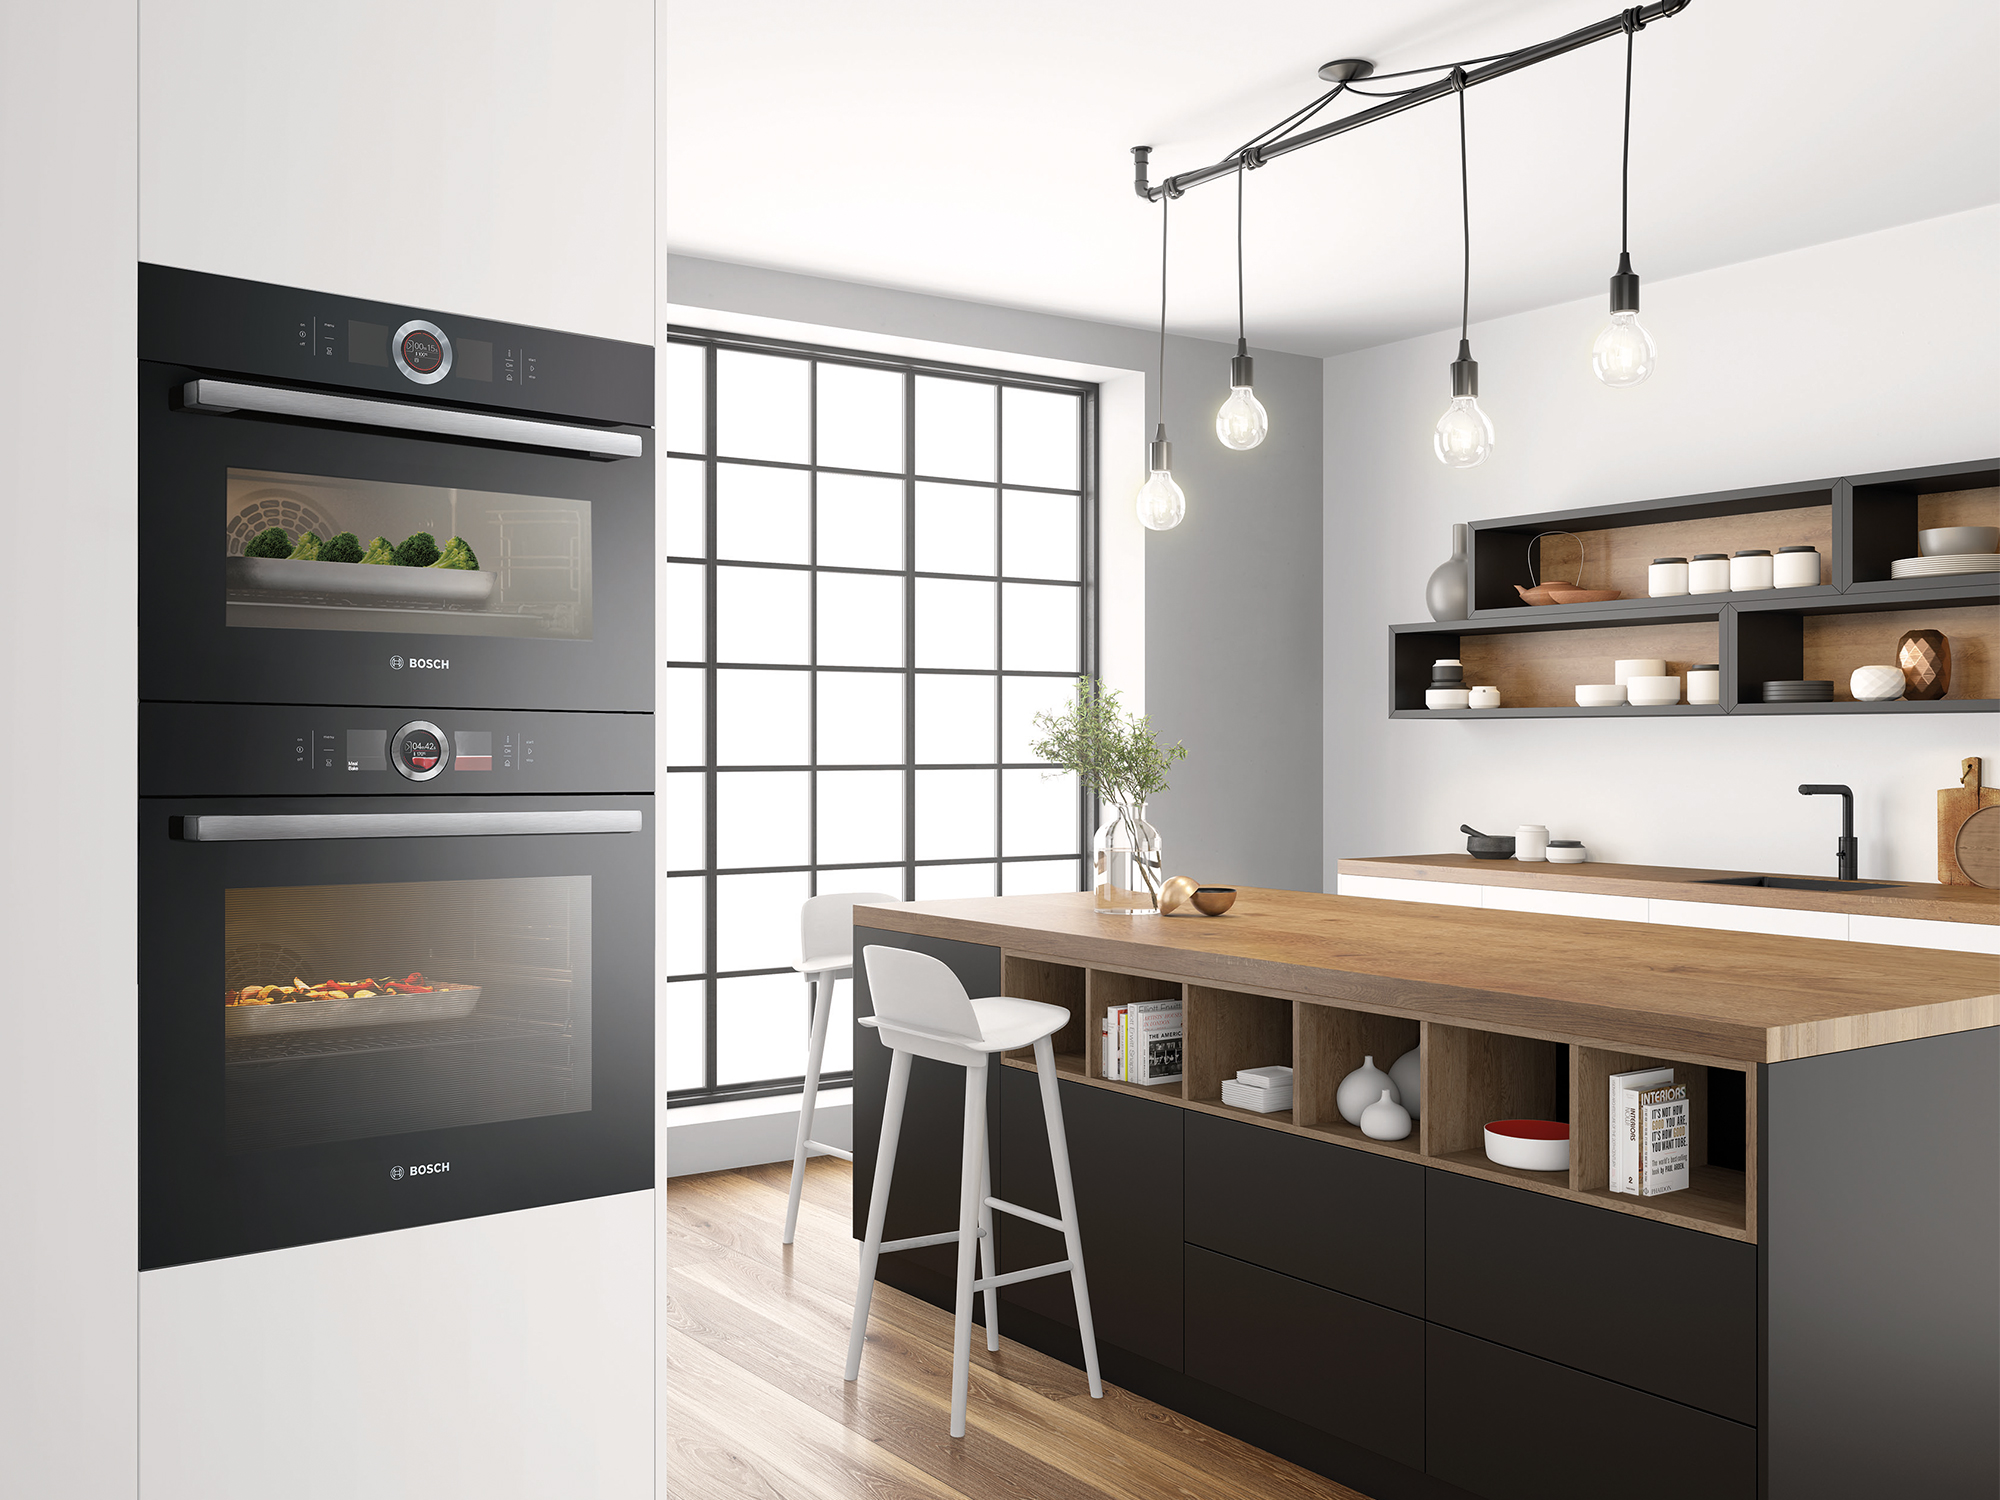 Ovens from Bosch